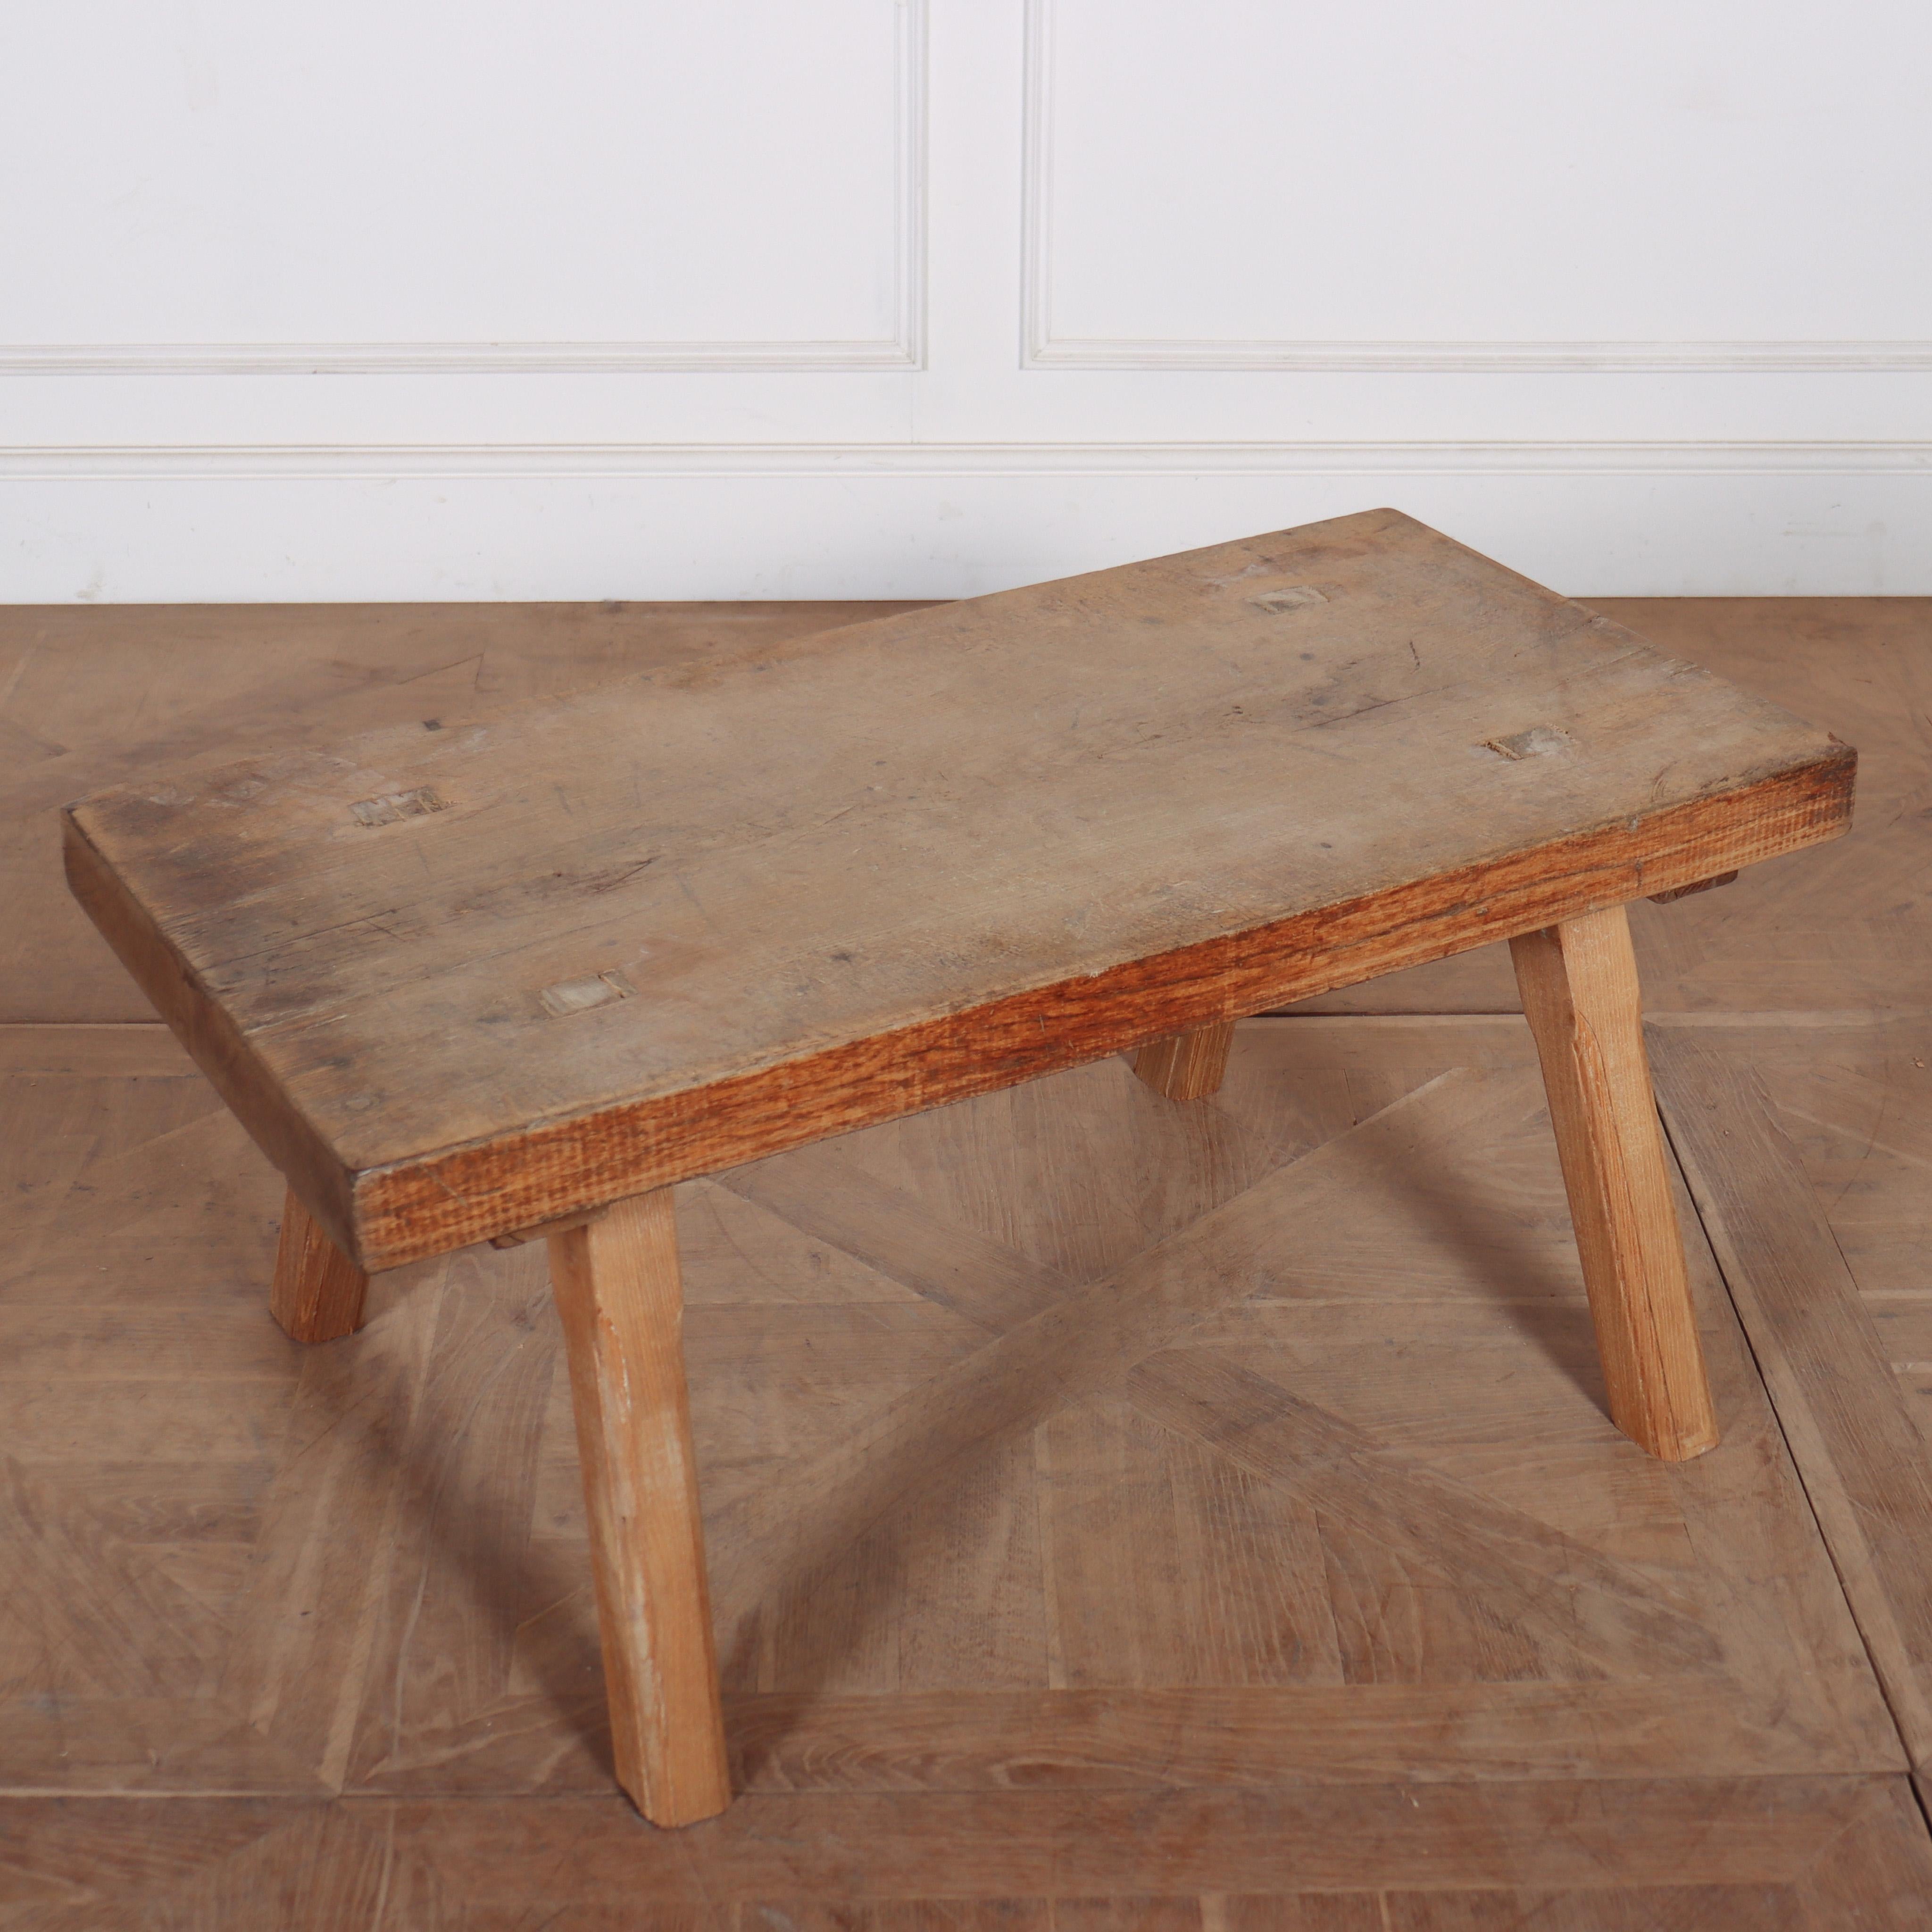 Nice French primitive oak low table / coffee table with a thick scrubbed top. 1890.

Reference: 8031

Dimensions
40 inches (102 cms) Wide
25 inches (64 cms) Deep
18.5 inches (47 cms) High